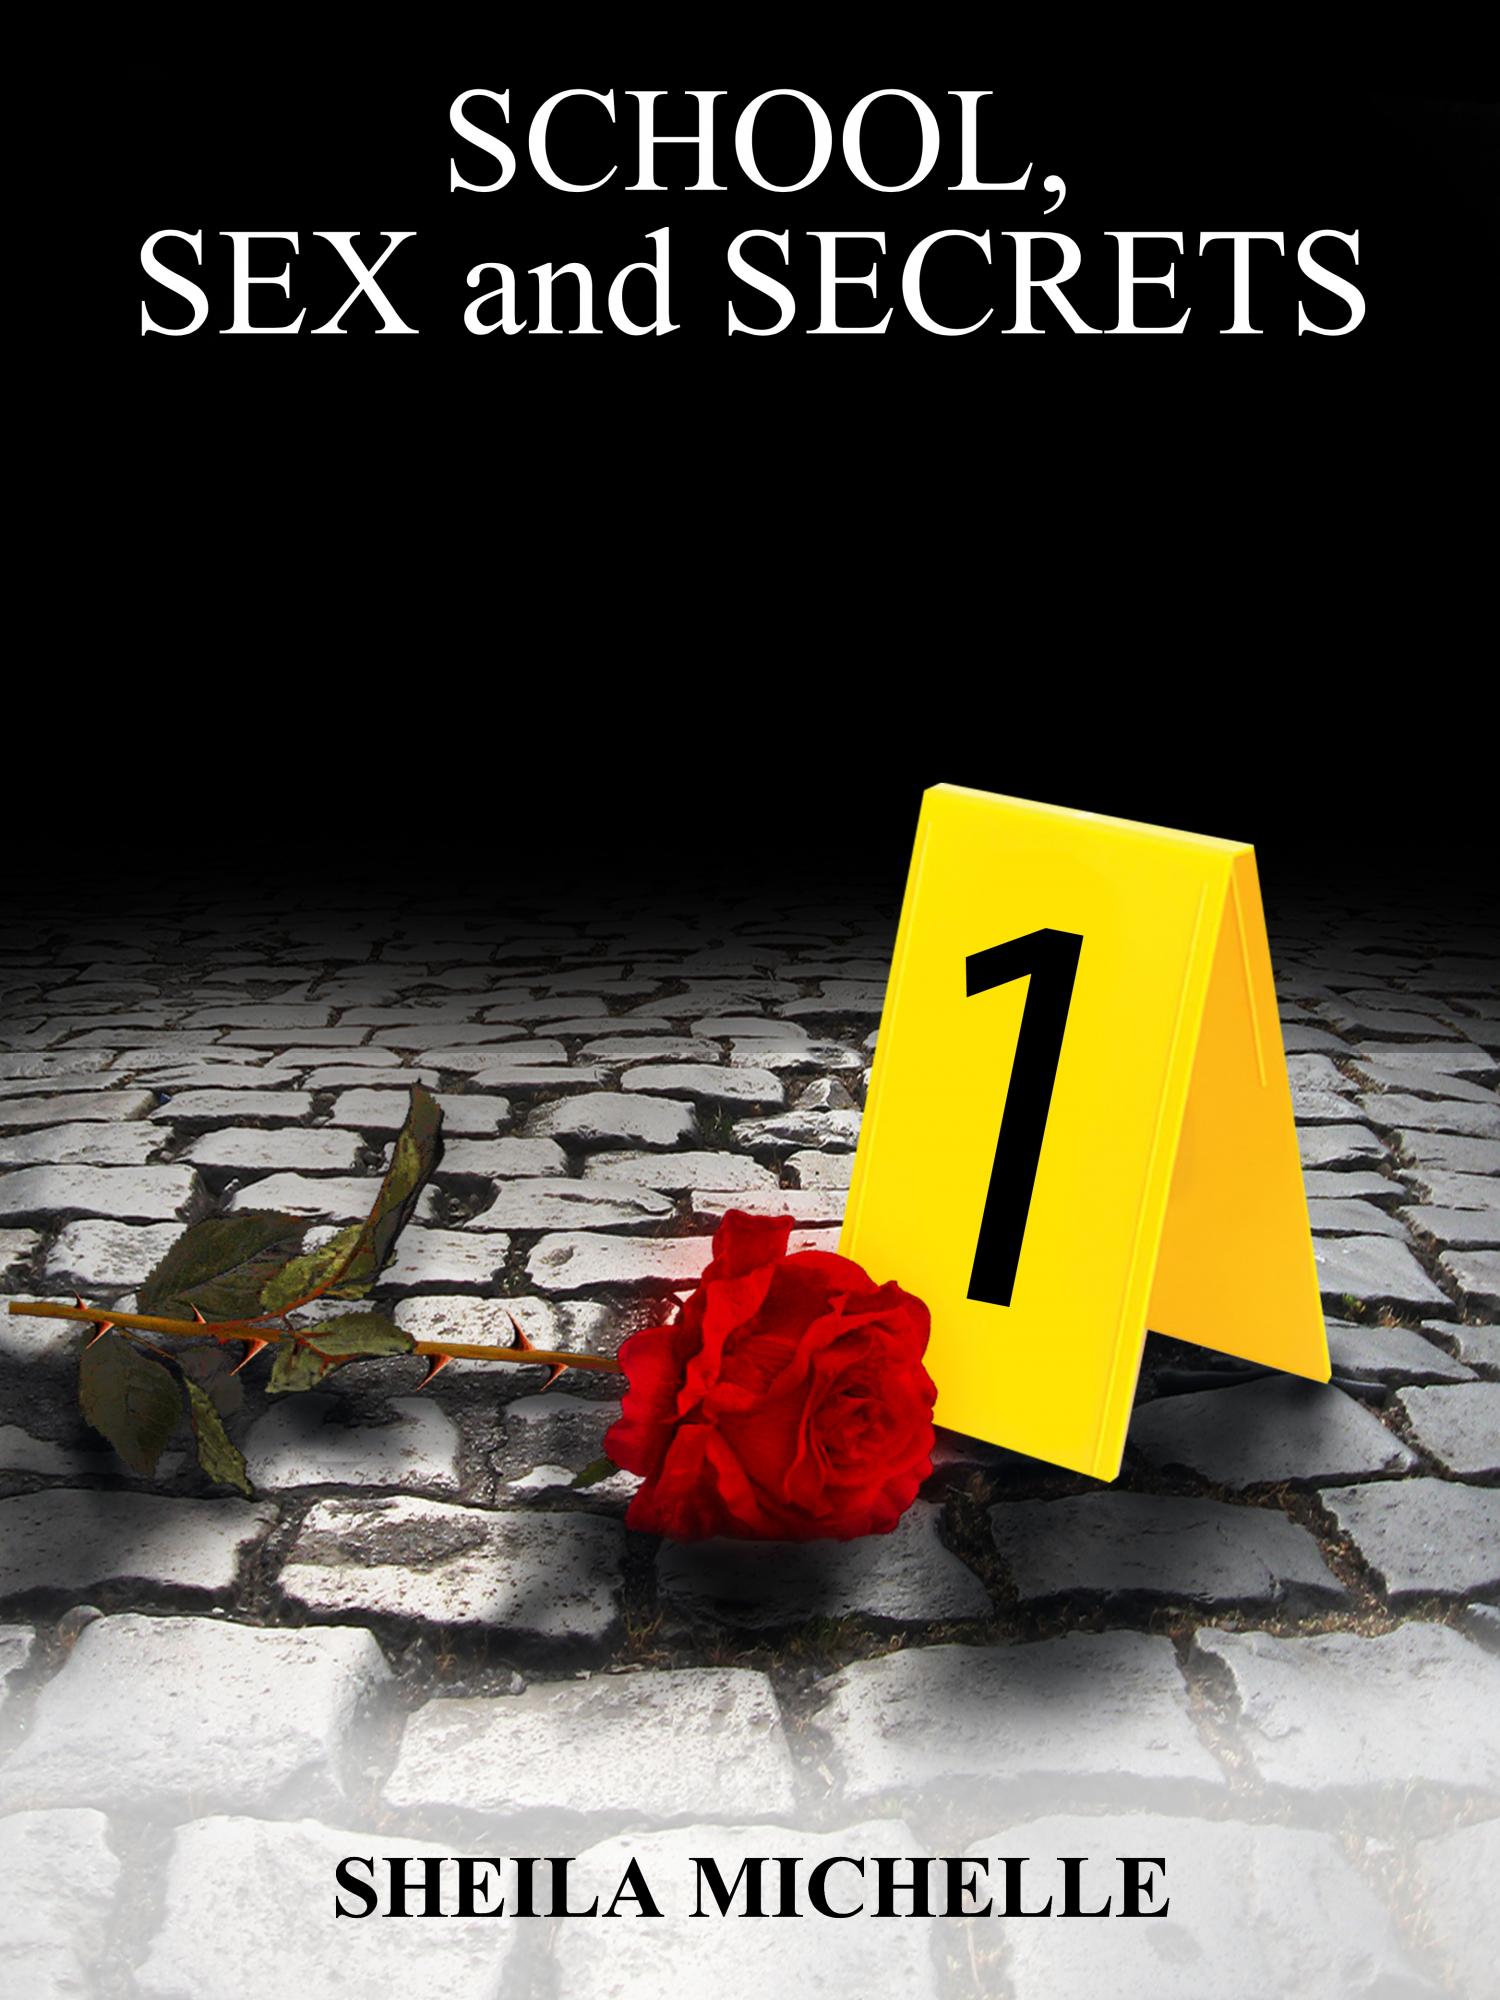 School, Sex and Secrets by Sheila Michelle